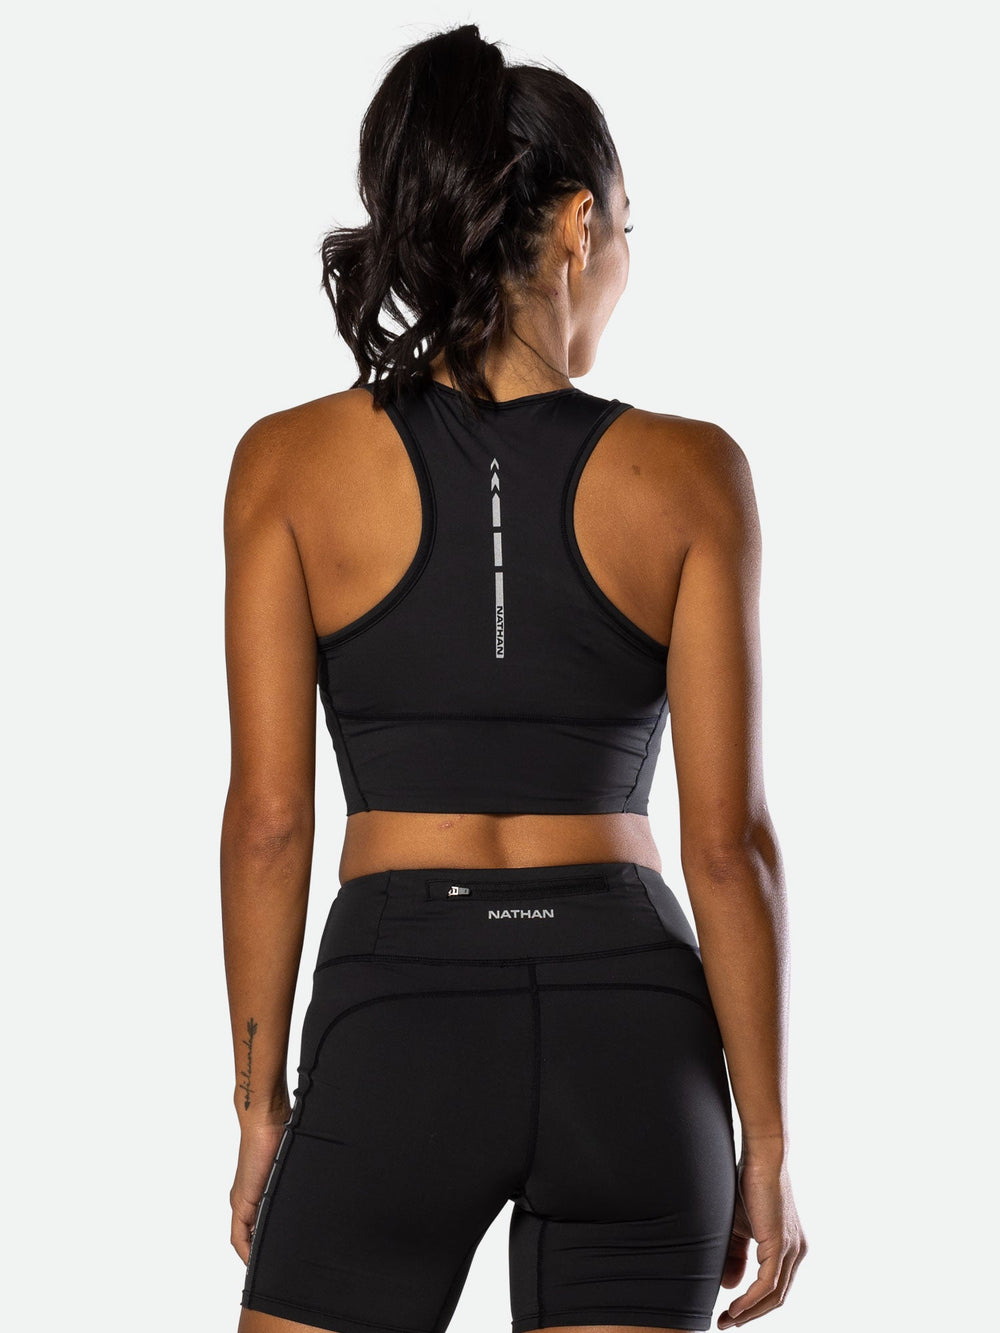 Women's - Compression Fit Sport Bras or Long Sleeves or Shorts or